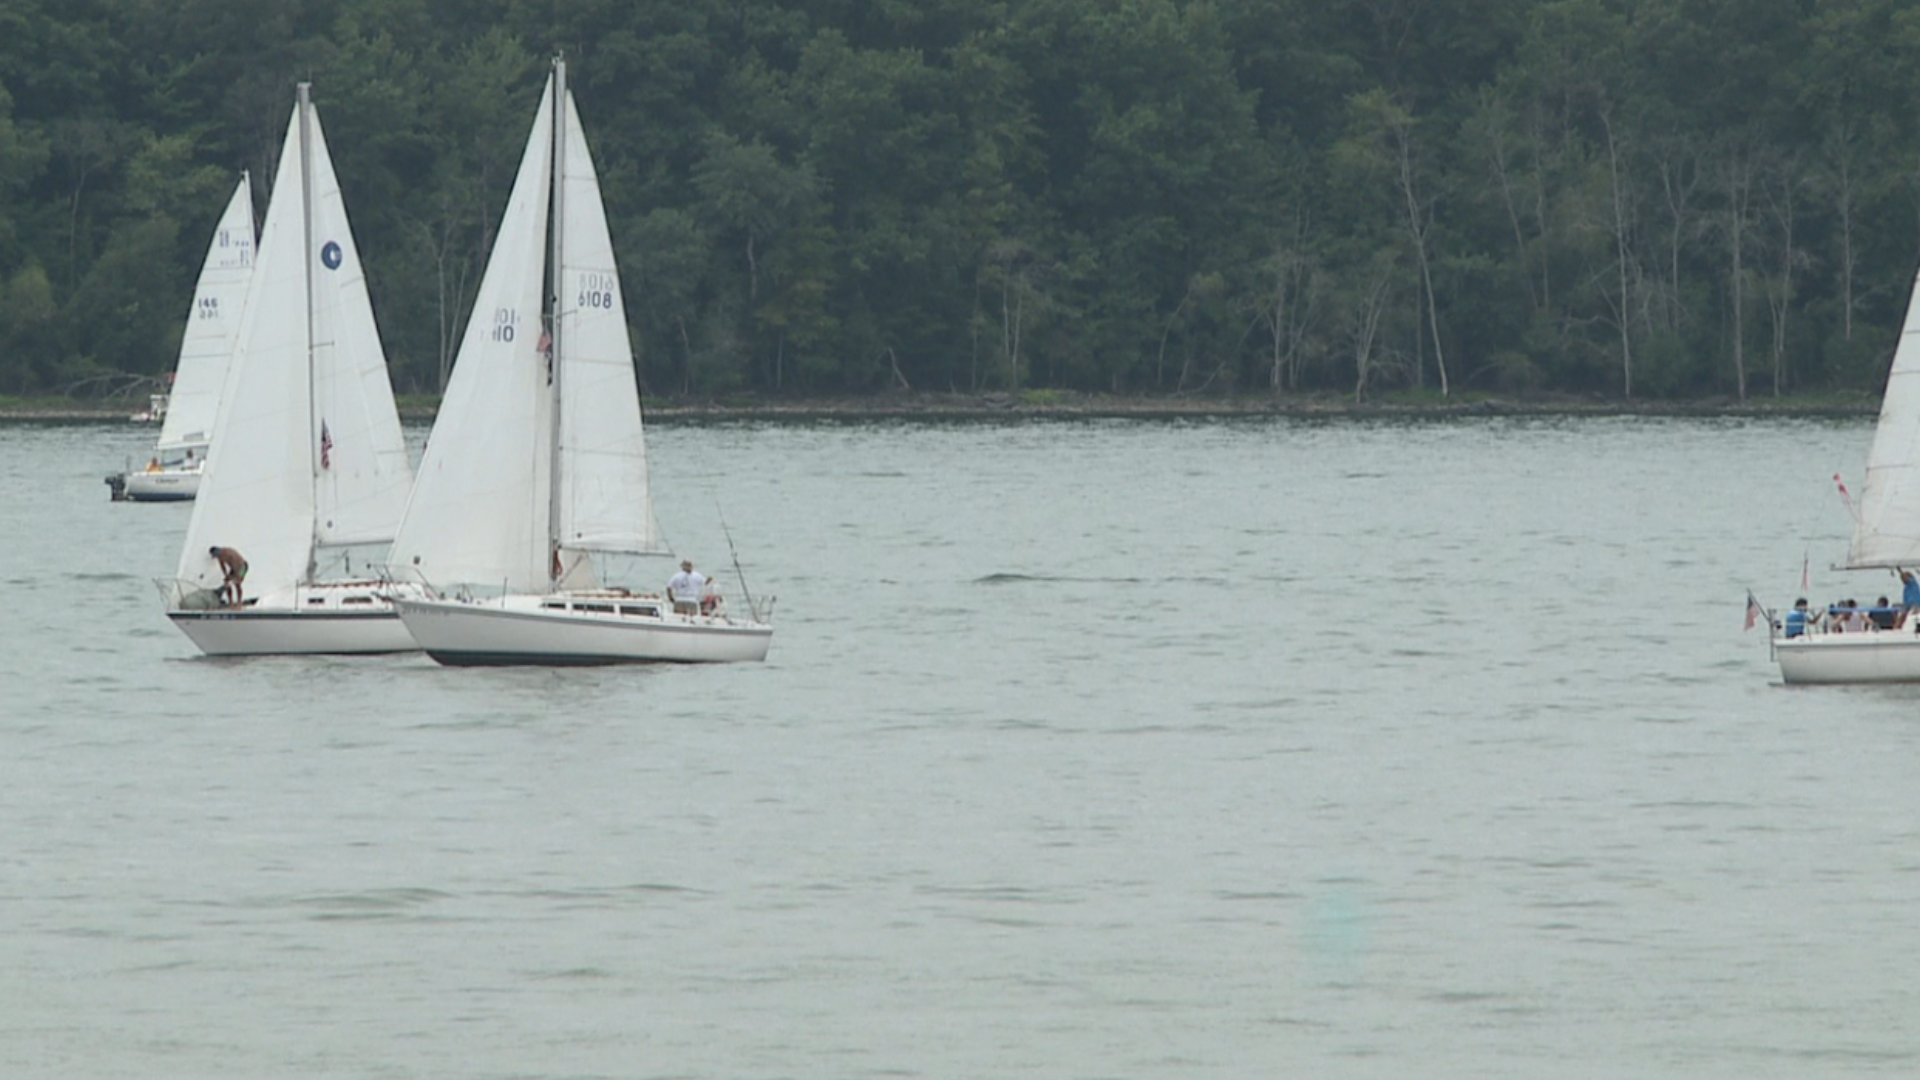 Even the gloomy skies couldn't keep boaters and buyers away from the weekend of music, food, and merchandise.